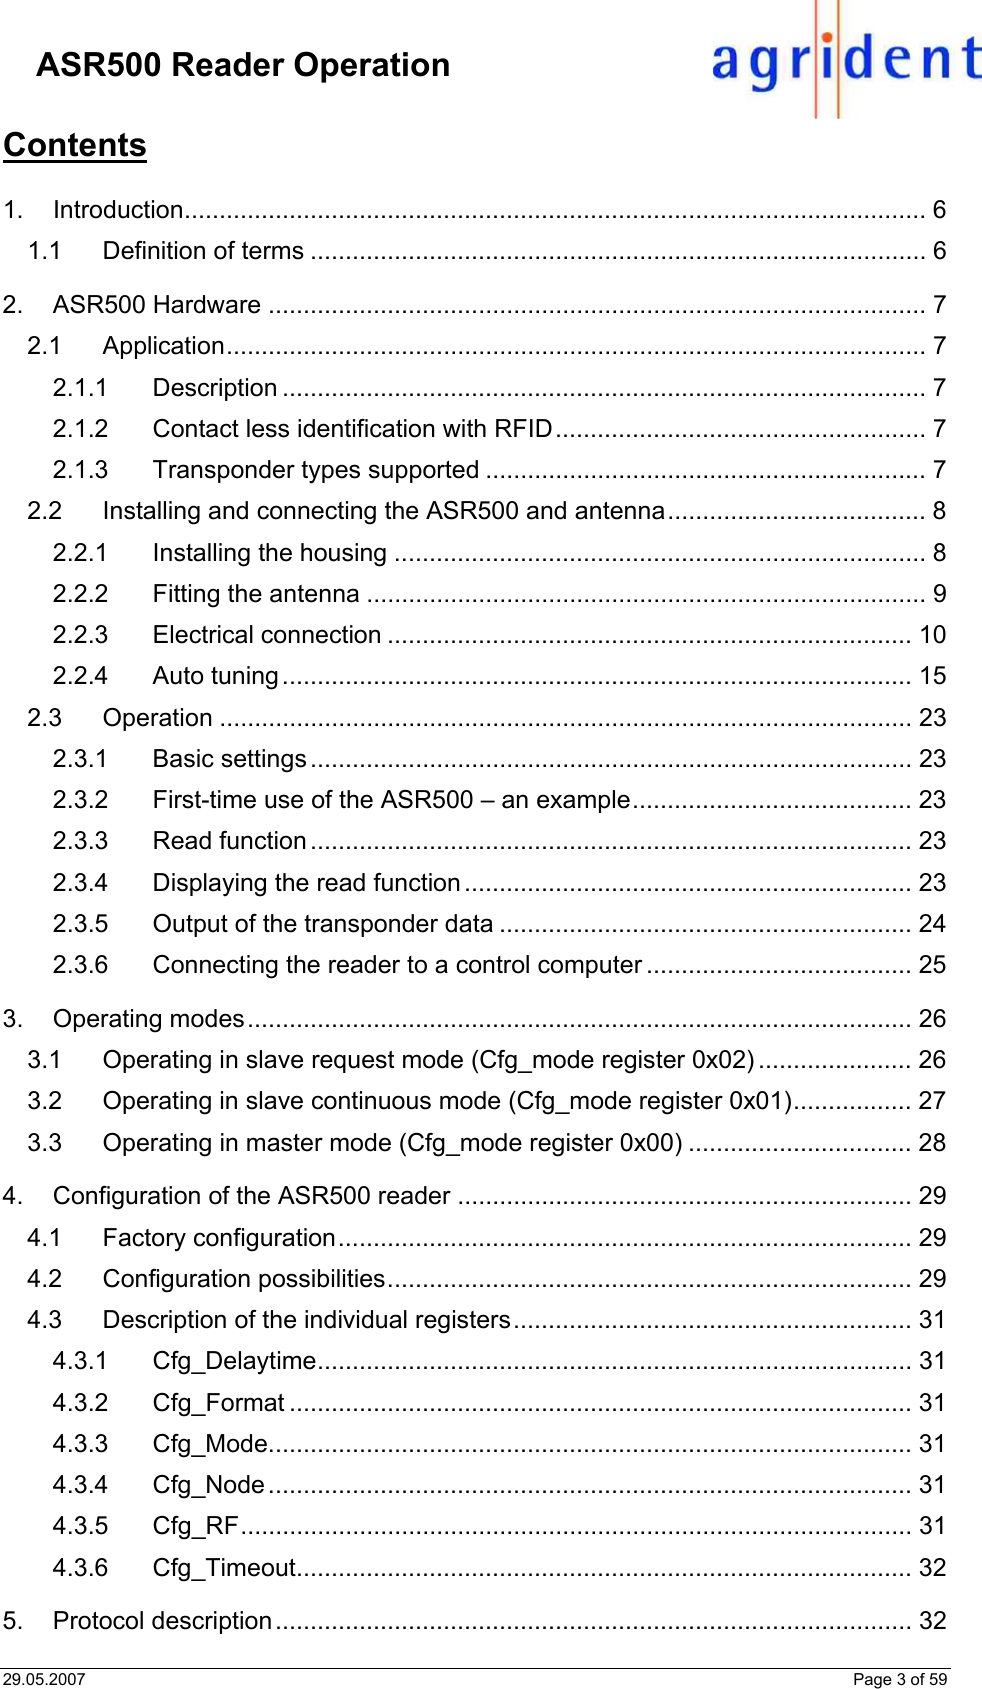 29.05.2007    Page 3 of 59     ASR500 Reader Operation Contents  1. Introduction.......................................................................................................... 6 1.1 Definition of terms ........................................................................................ 6 2. ASR500 Hardware .............................................................................................. 7 2.1 Application.................................................................................................... 7 2.1.1 Description ............................................................................................ 7 2.1.2 Contact less identification with RFID..................................................... 7 2.1.3 Transponder types supported ............................................................... 7 2.2 Installing and connecting the ASR500 and antenna..................................... 8 2.2.1 Installing the housing ............................................................................ 8 2.2.2 Fitting the antenna ................................................................................ 9 2.2.3 Electrical connection ........................................................................... 10 2.2.4 Auto tuning.......................................................................................... 15 2.3 Operation ................................................................................................... 23 2.3.1 Basic settings ...................................................................................... 23 2.3.2 First-time use of the ASR500 – an example........................................ 23 2.3.3 Read function ...................................................................................... 23 2.3.4 Displaying the read function................................................................ 23 2.3.5 Output of the transponder data ........................................................... 24 2.3.6 Connecting the reader to a control computer ...................................... 25 3. Operating modes............................................................................................... 26 3.1 Operating in slave request mode (Cfg_mode register 0x02) ...................... 26 3.2 Operating in slave continuous mode (Cfg_mode register 0x01)................. 27 3.3 Operating in master mode (Cfg_mode register 0x00) ................................ 28 4. Configuration of the ASR500 reader ................................................................. 29 4.1 Factory configuration.................................................................................. 29 4.2 Configuration possibilities........................................................................... 29 4.3 Description of the individual registers......................................................... 31 4.3.1 Cfg_Delaytime..................................................................................... 31 4.3.2 Cfg_Format ......................................................................................... 31 4.3.3 Cfg_Mode............................................................................................ 31 4.3.4 Cfg_Node............................................................................................ 31 4.3.5 Cfg_RF................................................................................................ 31 4.3.6 Cfg_Timeout........................................................................................ 32 5. Protocol description........................................................................................... 32 